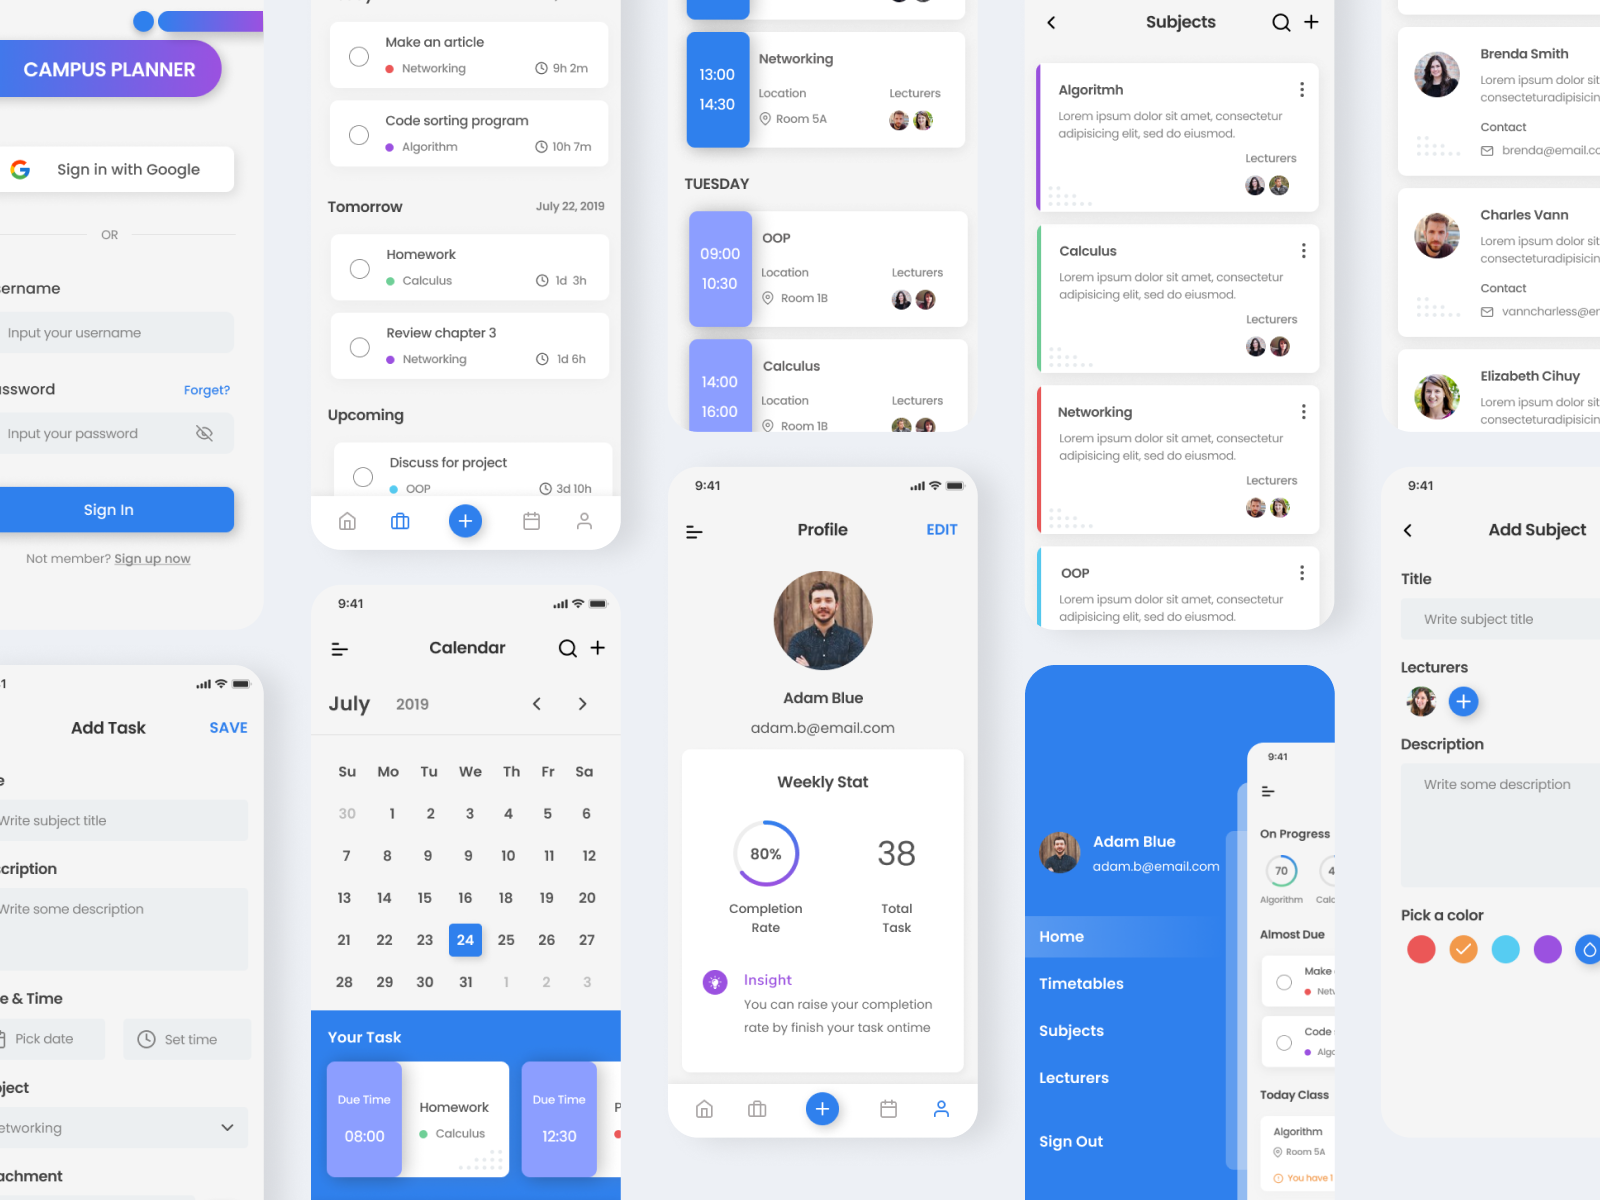 Campus Planner Full by Mohammad Firdaus on Dribbble